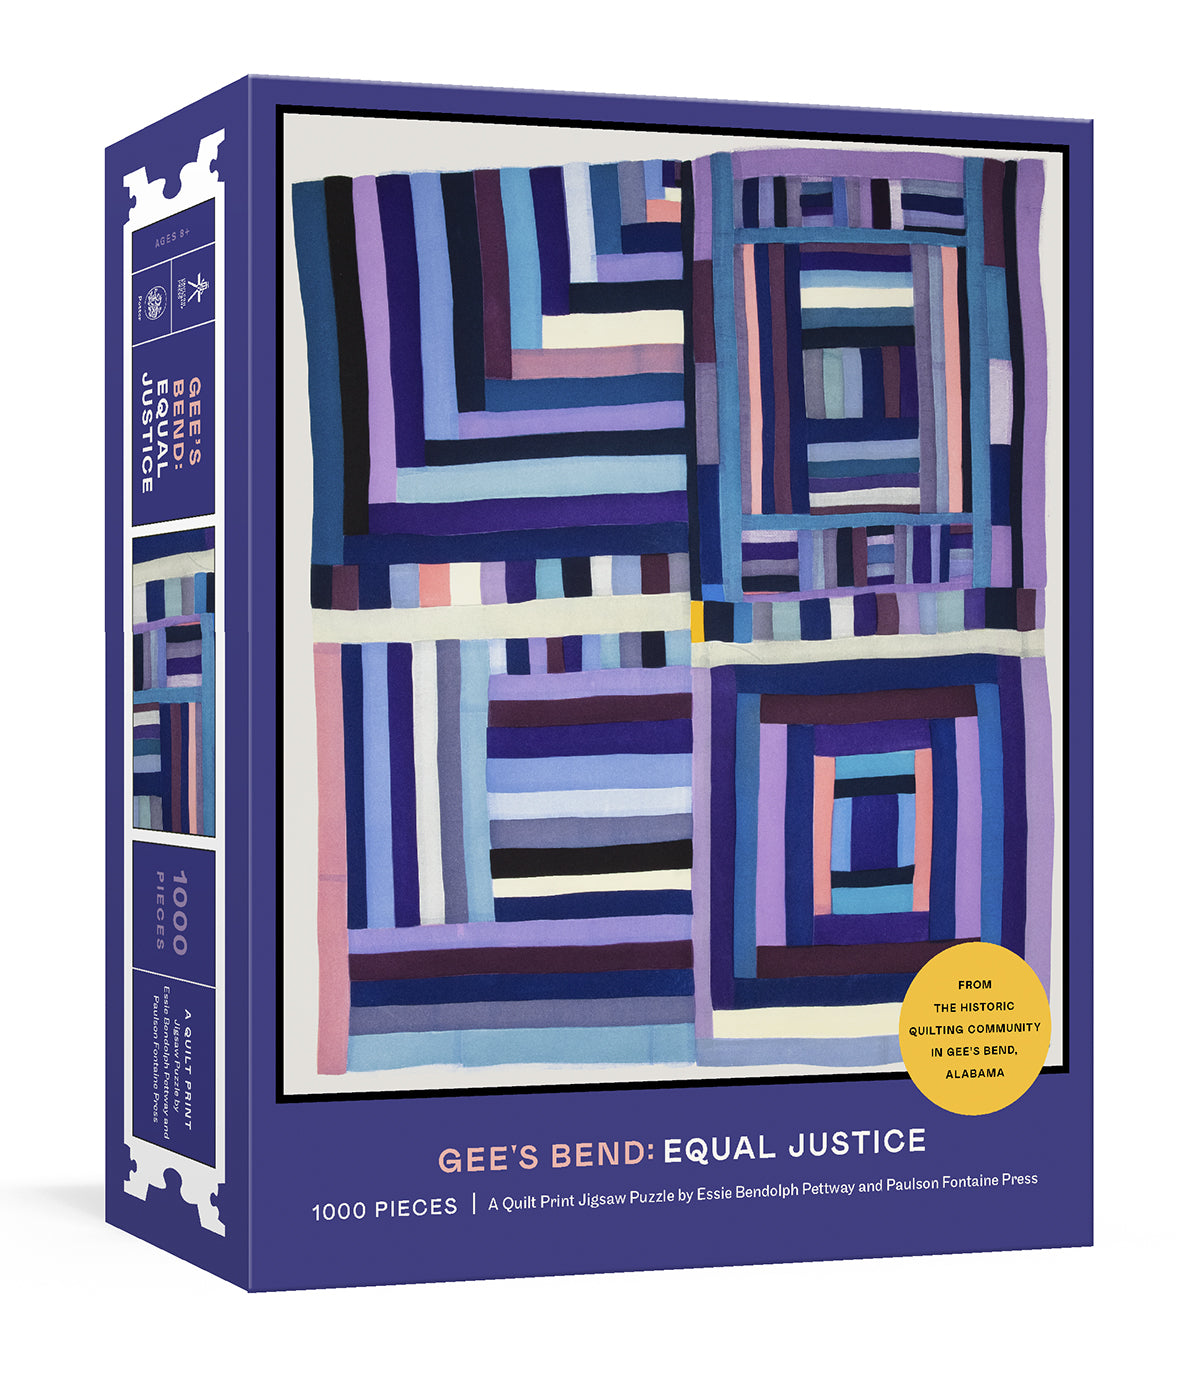 Gee's Bend: Equal Justice // A 1,000 Pc Quilt Print Jigsaw for Adults